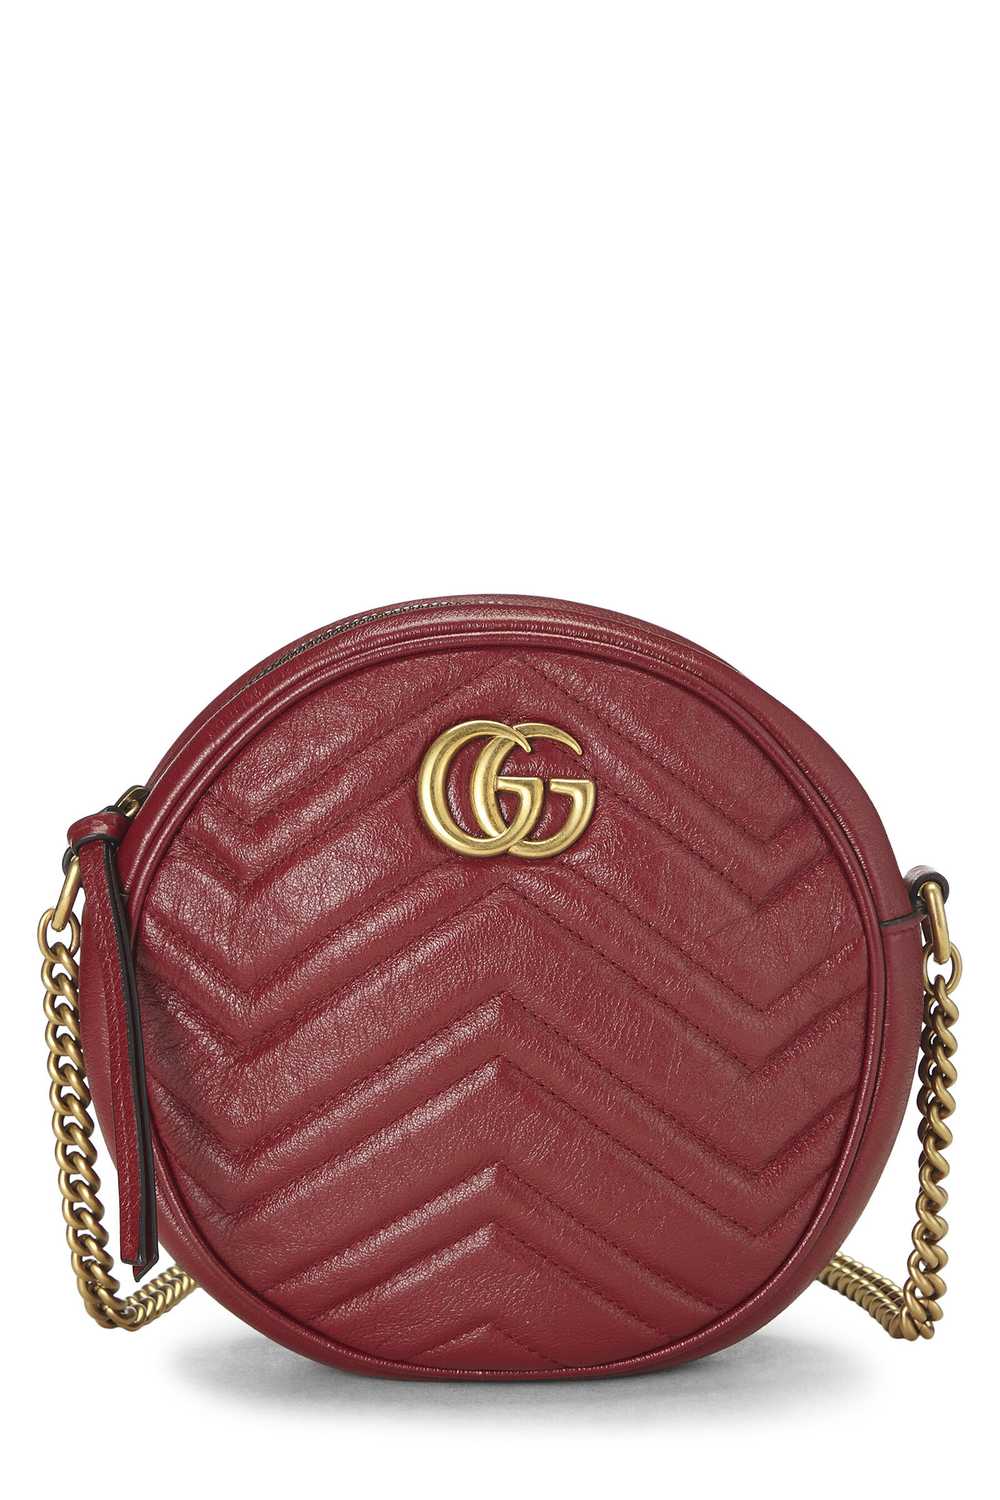 Red Leather GG Marmont Round Shoulder Bag Mini - image 1